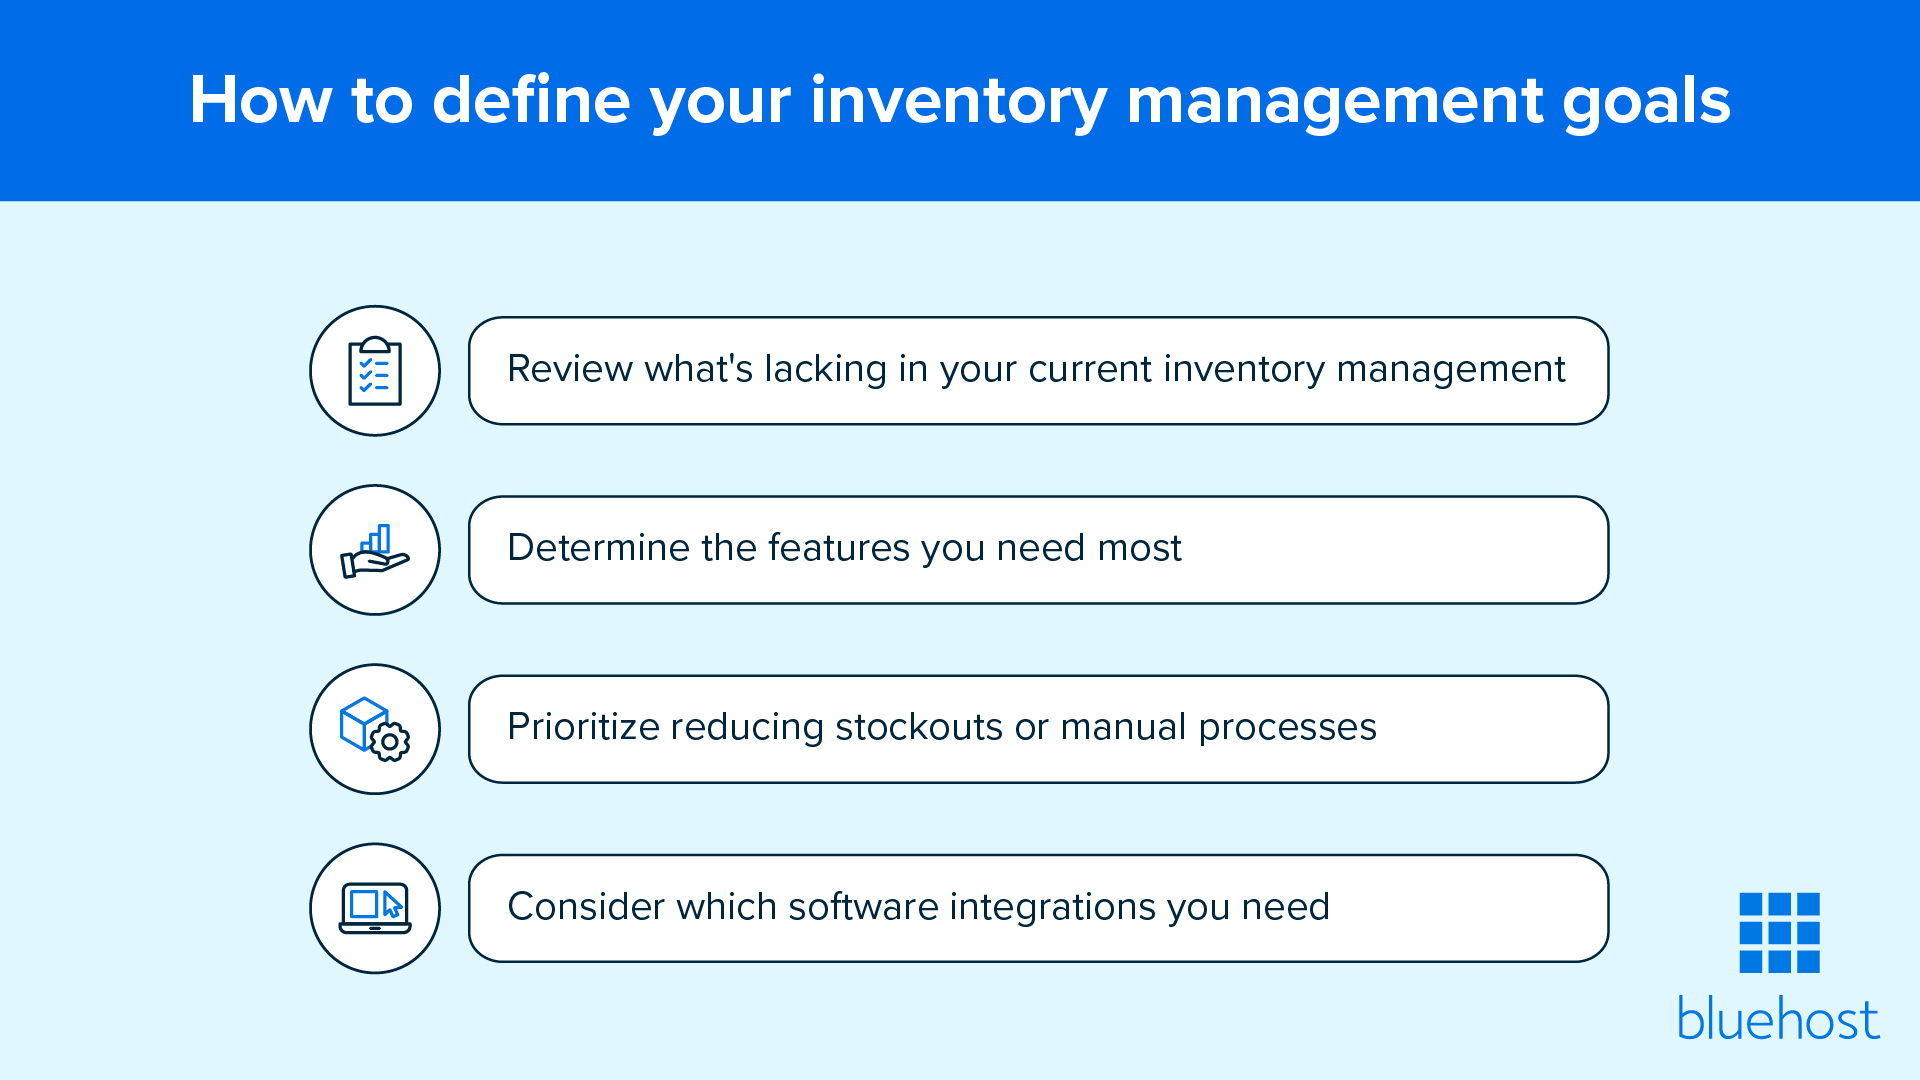 How to define your inventory management goals.